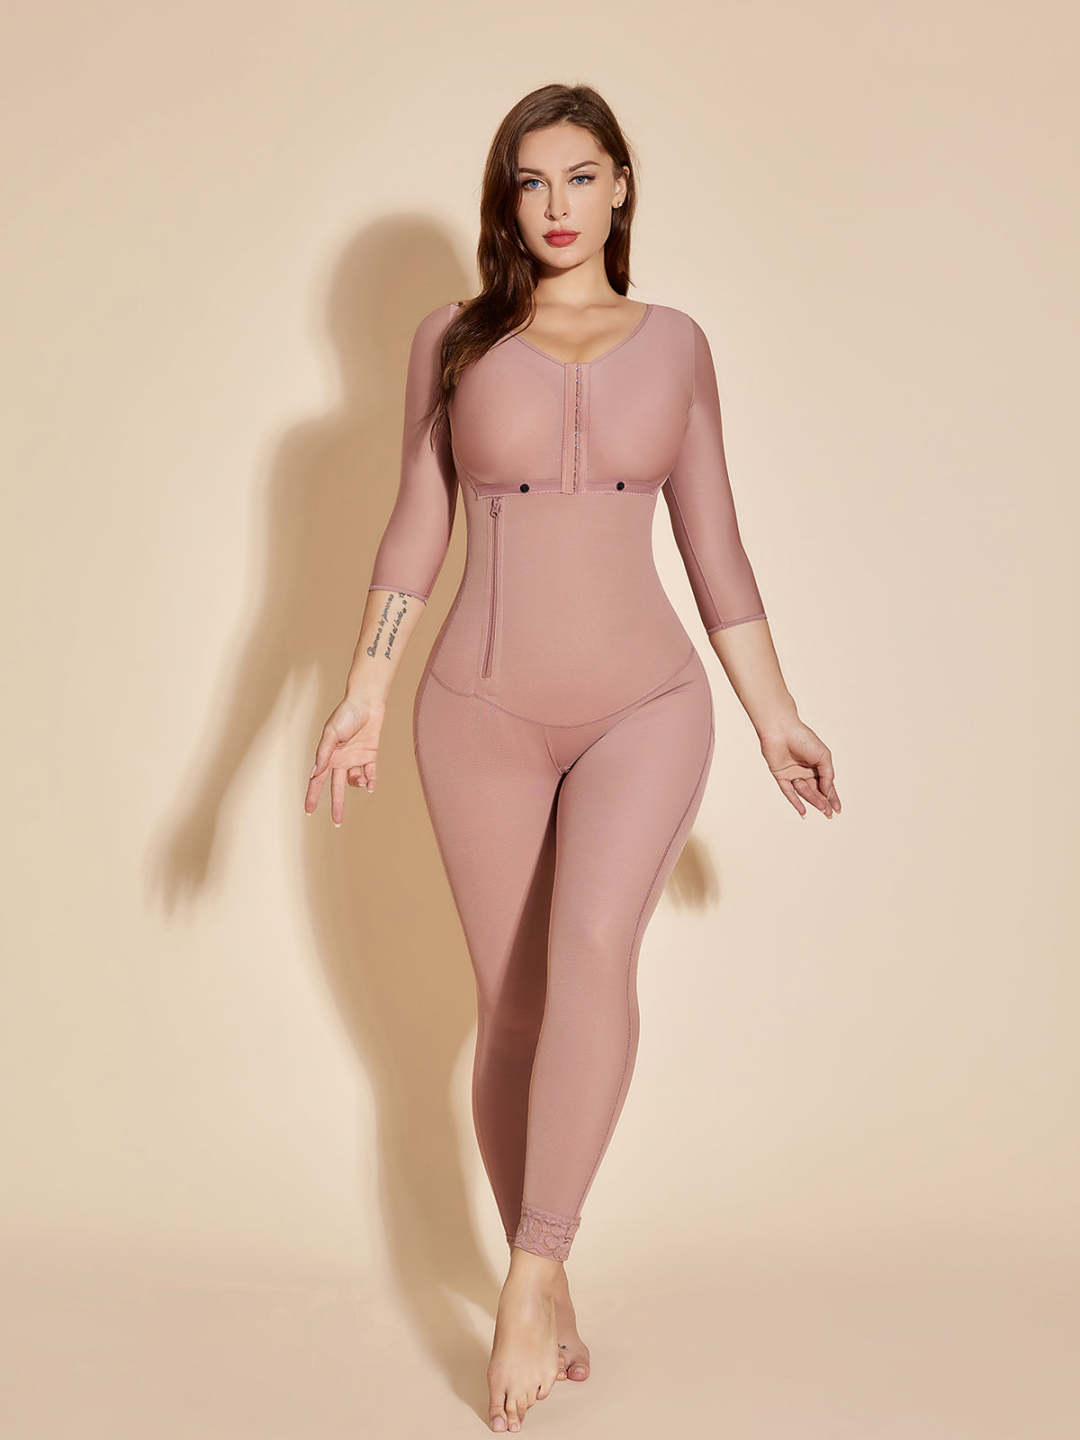 Full Control Women Shapewear Chest Packed Body Shaper Rosybrown Chiccurve 2216